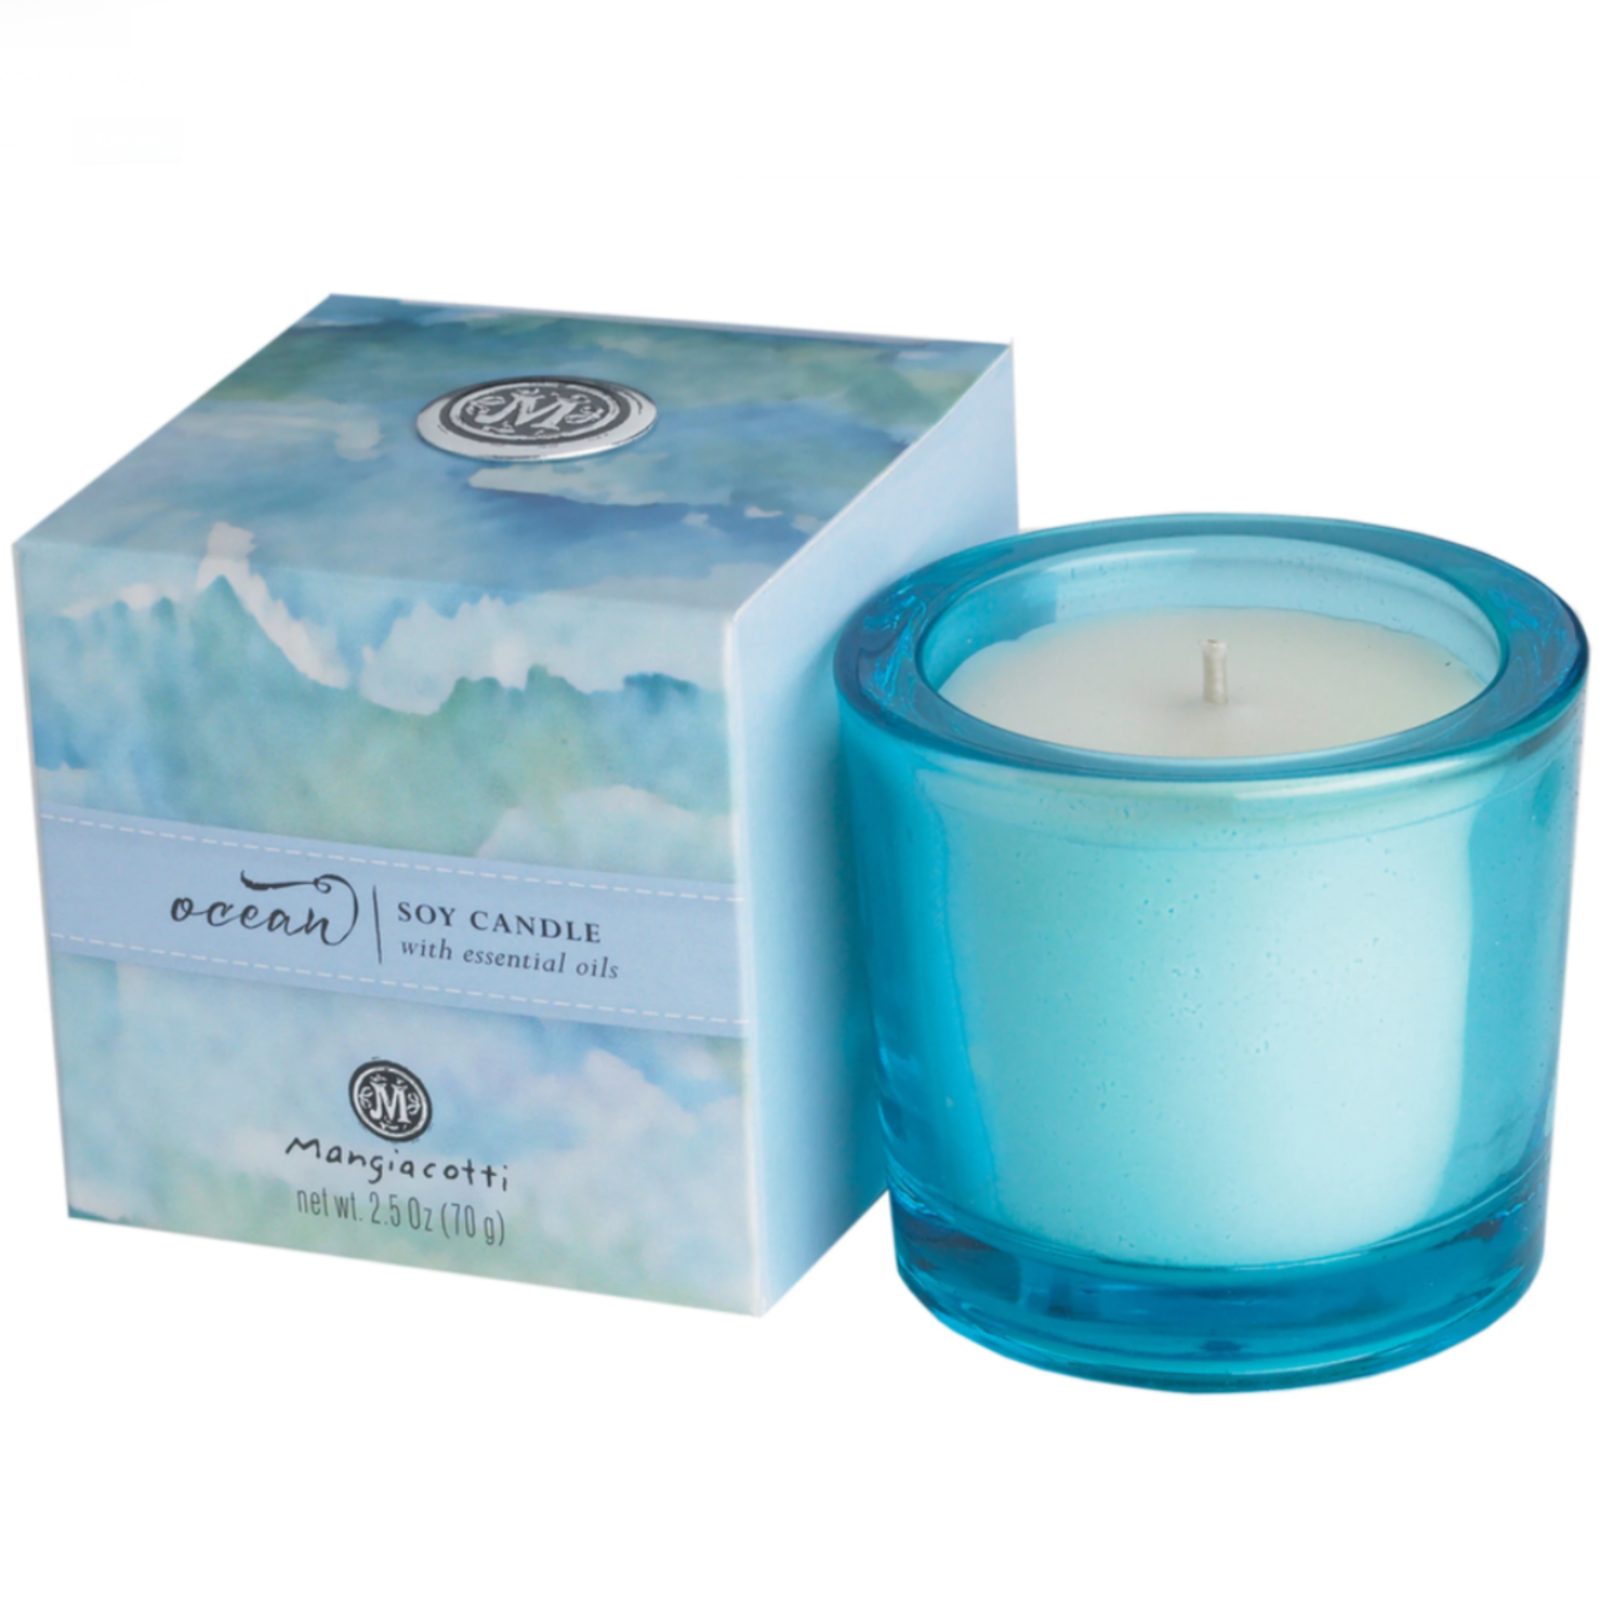 Mangiacotti Ocean Soy Candle   20 hrs burn time 2552 loading=